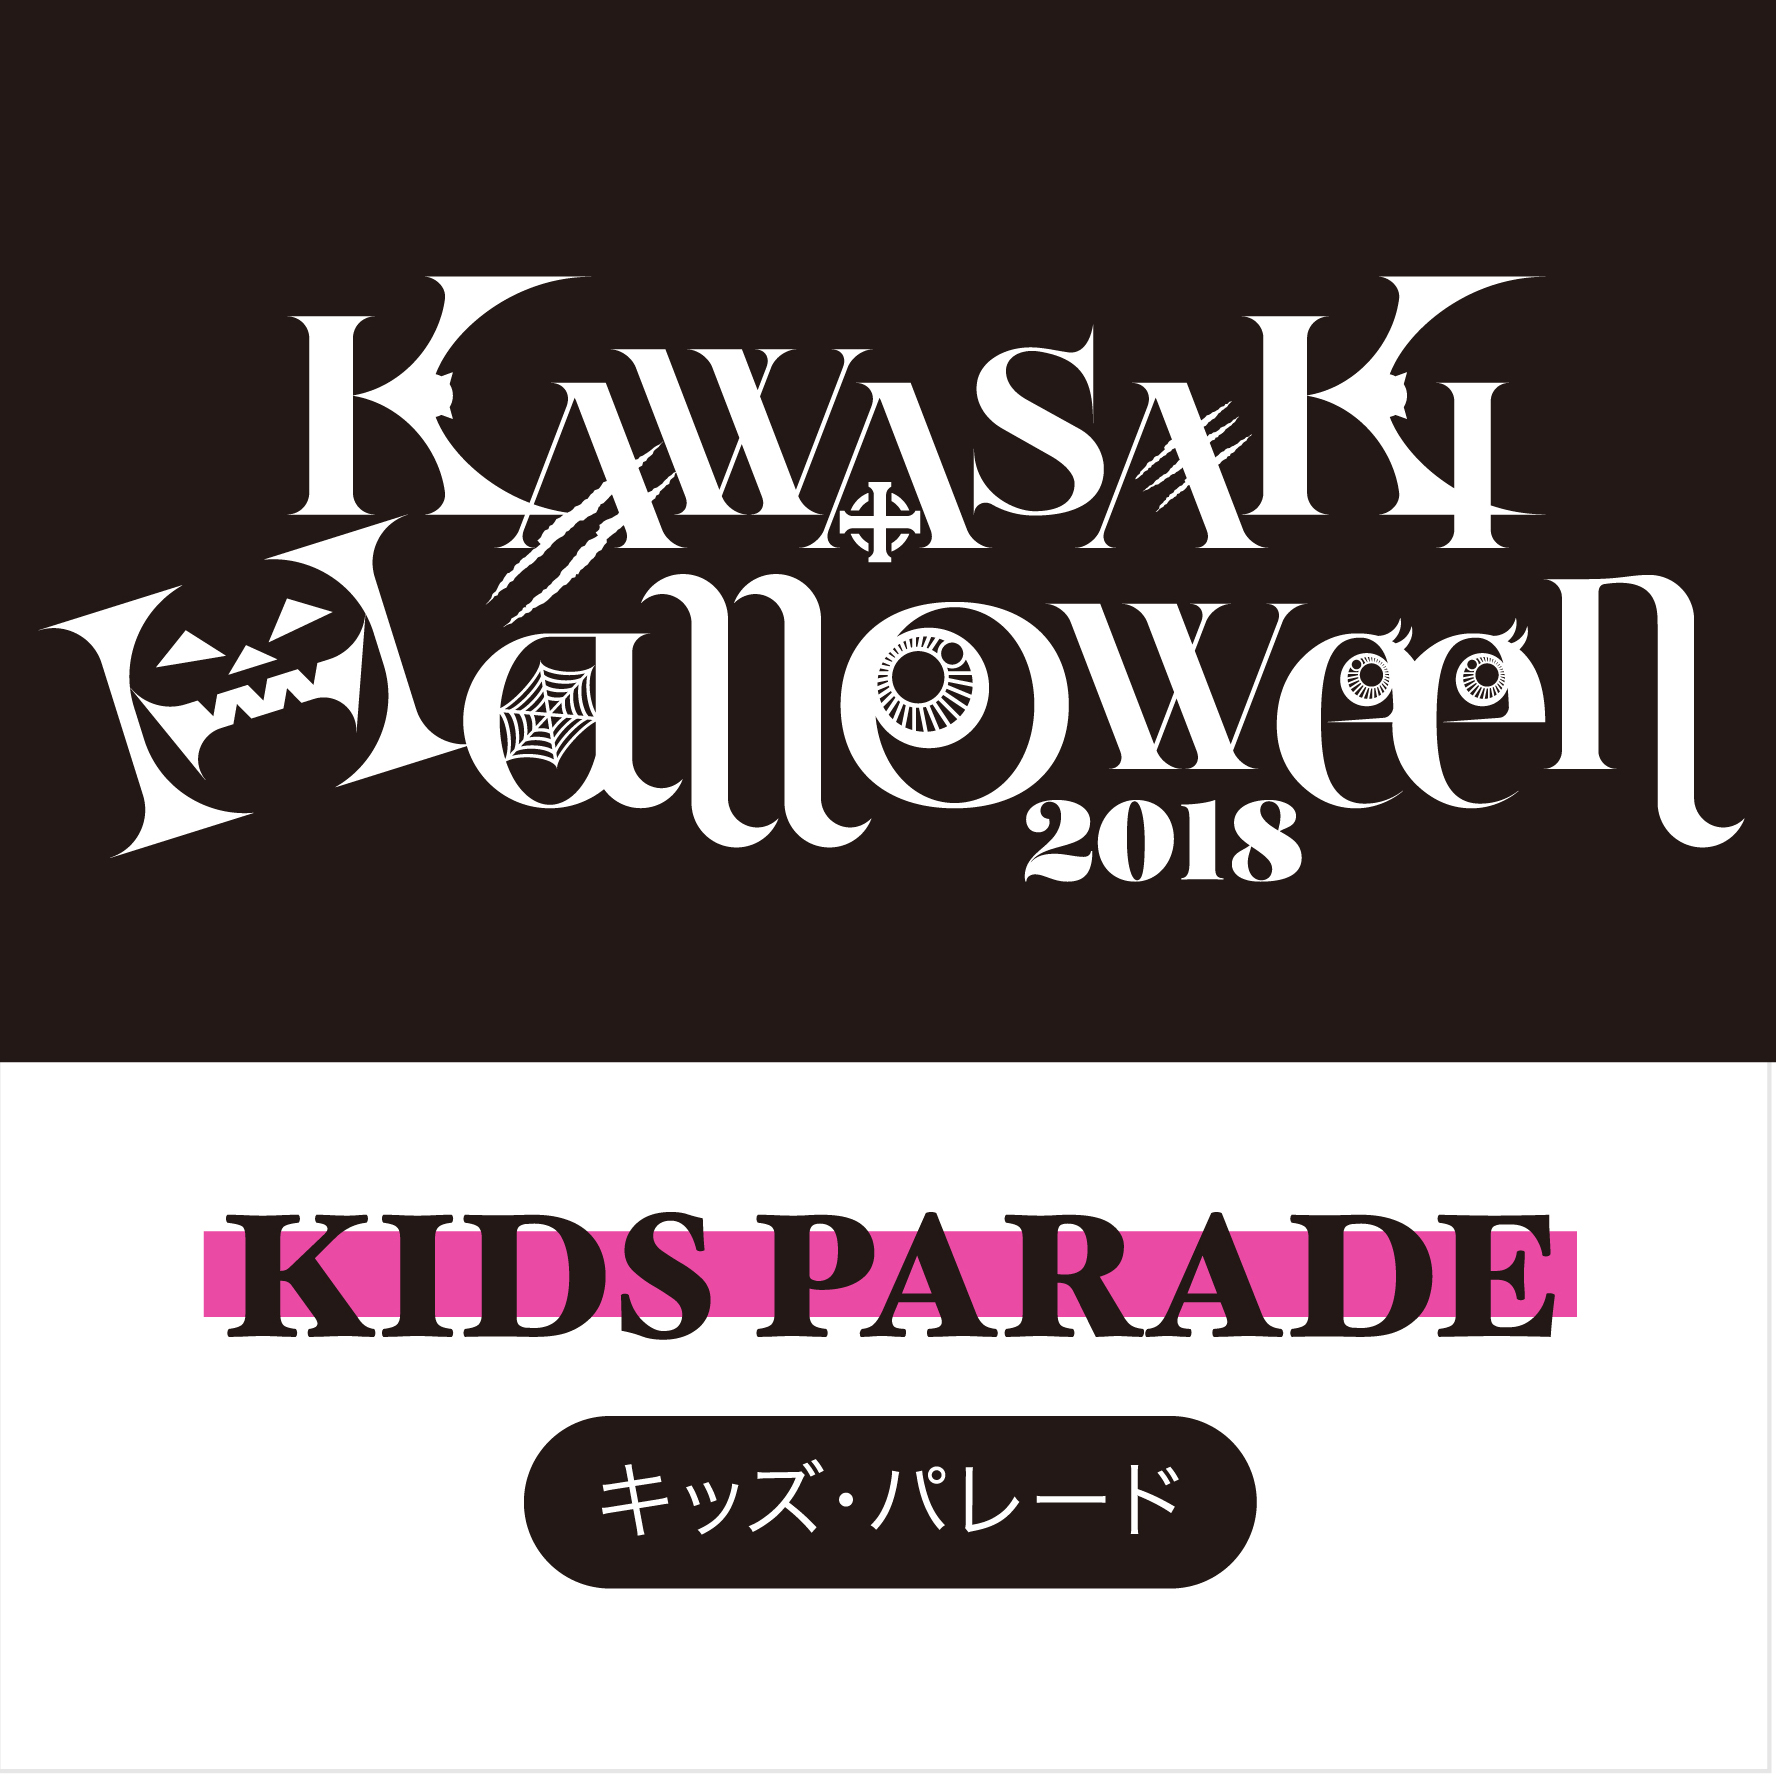 KAWASAKI Halloween 2018 キッズ・パレード Supported by 横浜トヨペット